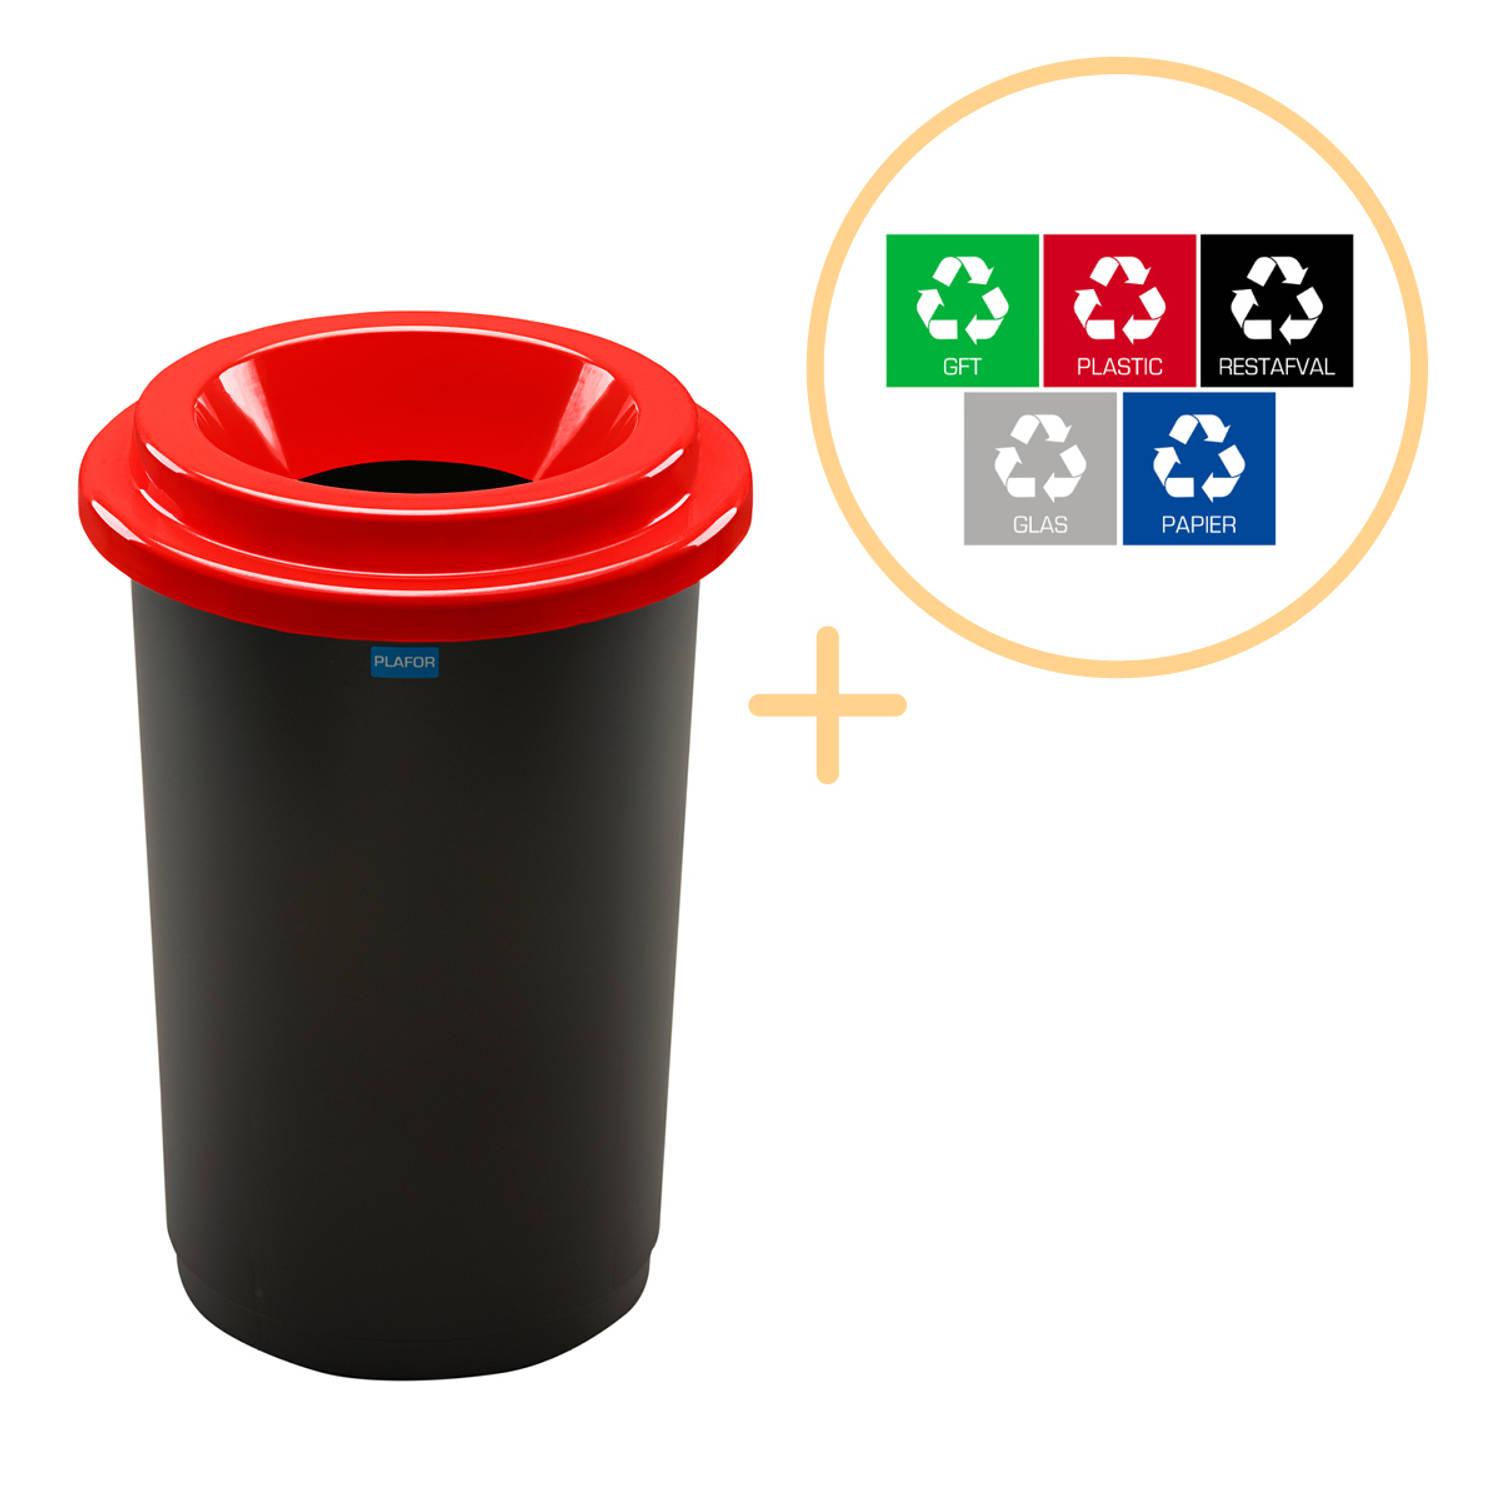 Plafor Eco Prullenbak 50L - Recycling - Rood